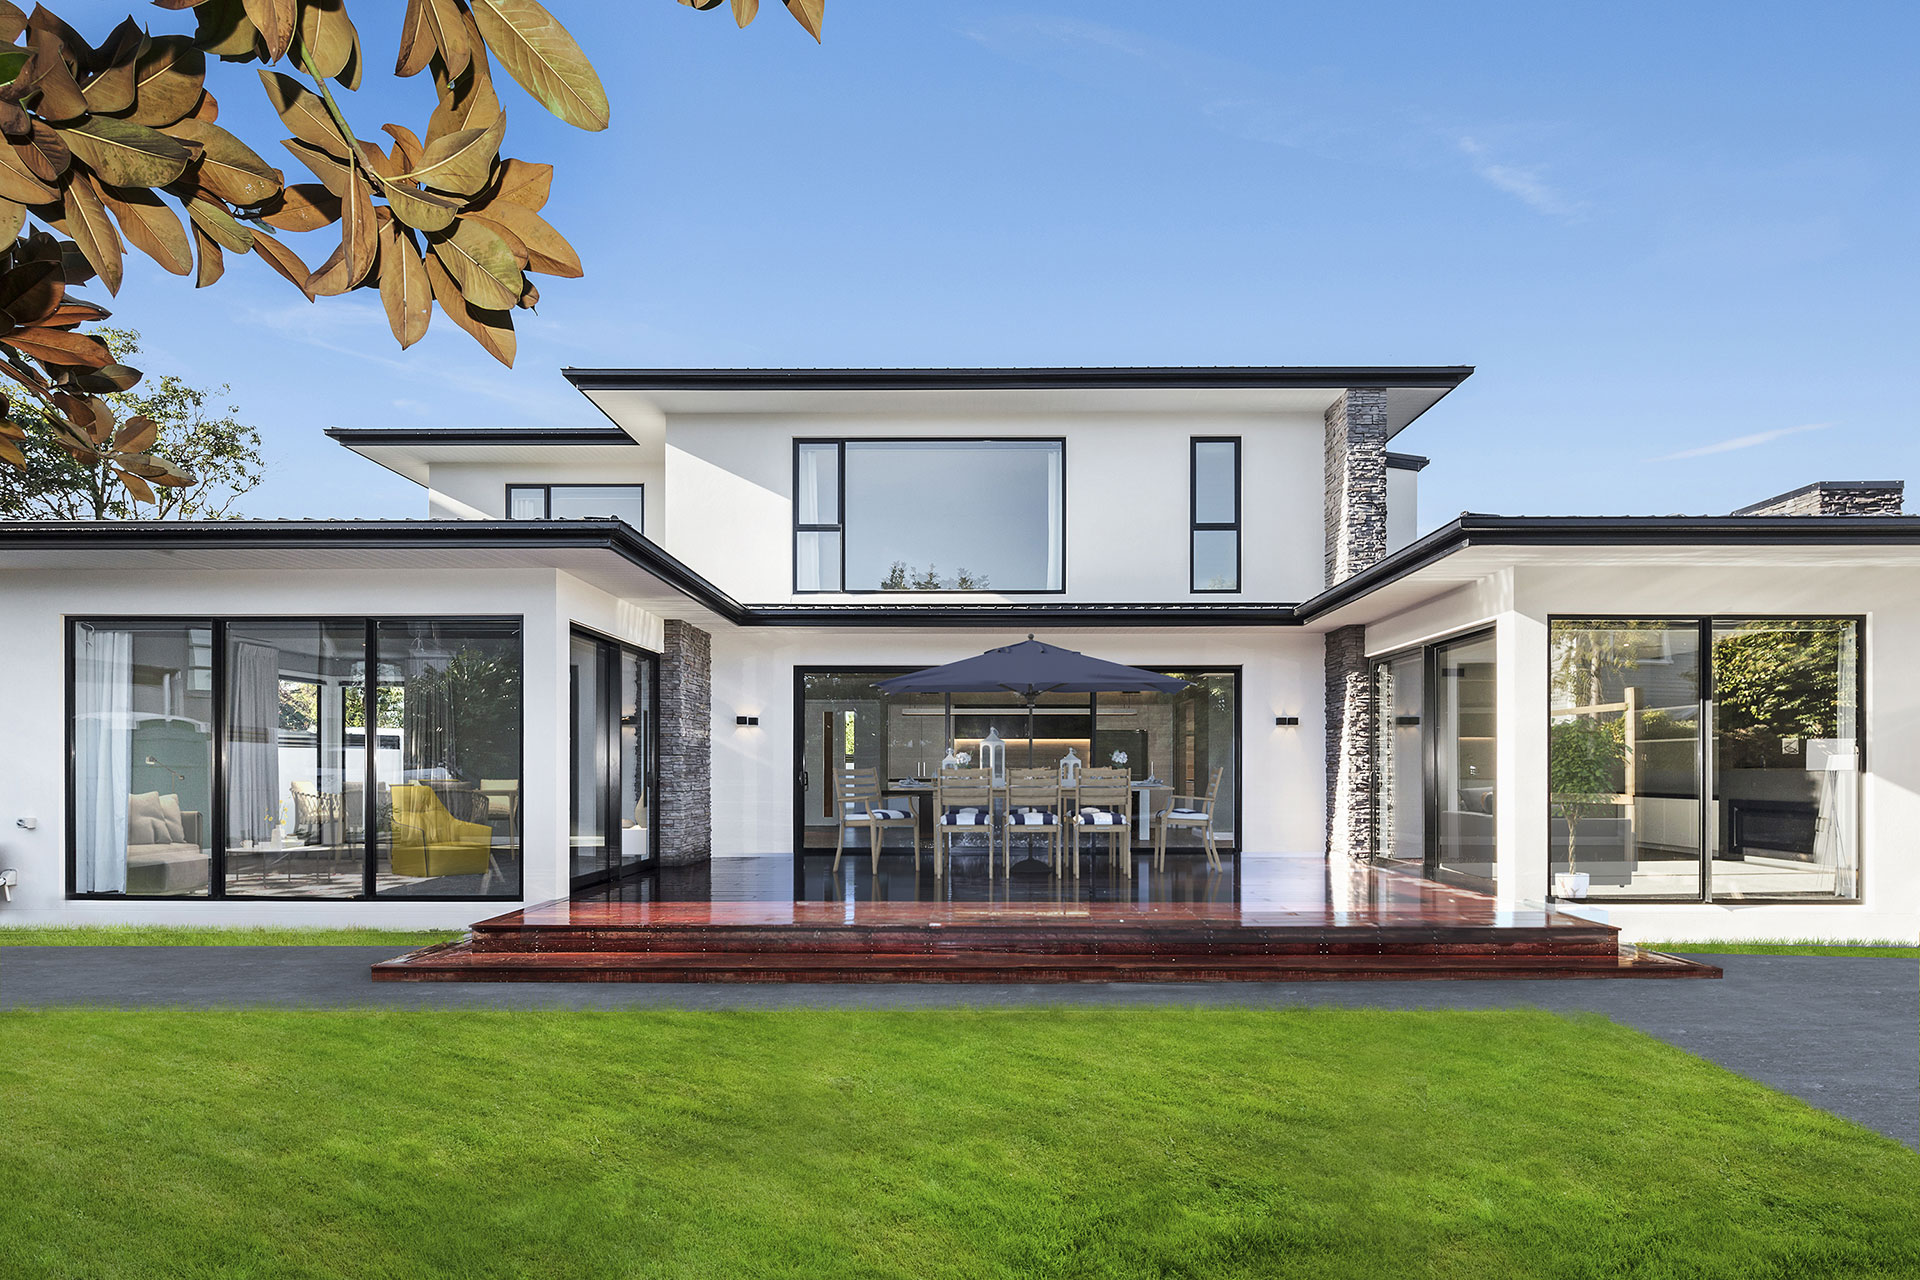 MacDougall house plan Hallmark Homes, View Hallmark Homes' completed house build projects in Christchurch NZ, View custom bespoke functional and aesthetically designed New Zealand built homes,